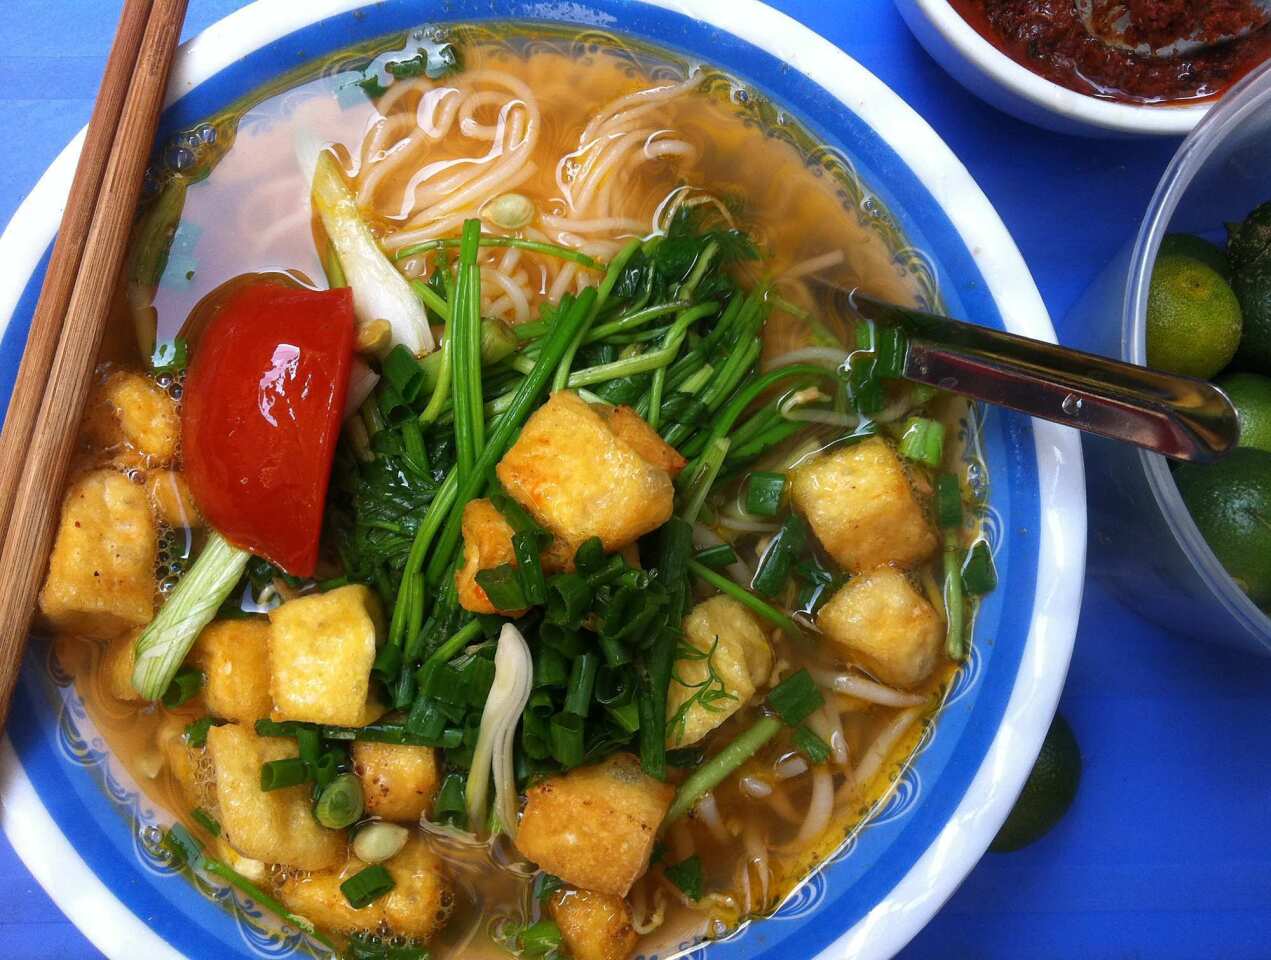 A bowl of bun dau is served at a street stall in Hanoi's Old Quarter. The light noodle soup with tomatoes, crunchy greens and tender little pillows of fried tofu makes for a satisfying lunch.